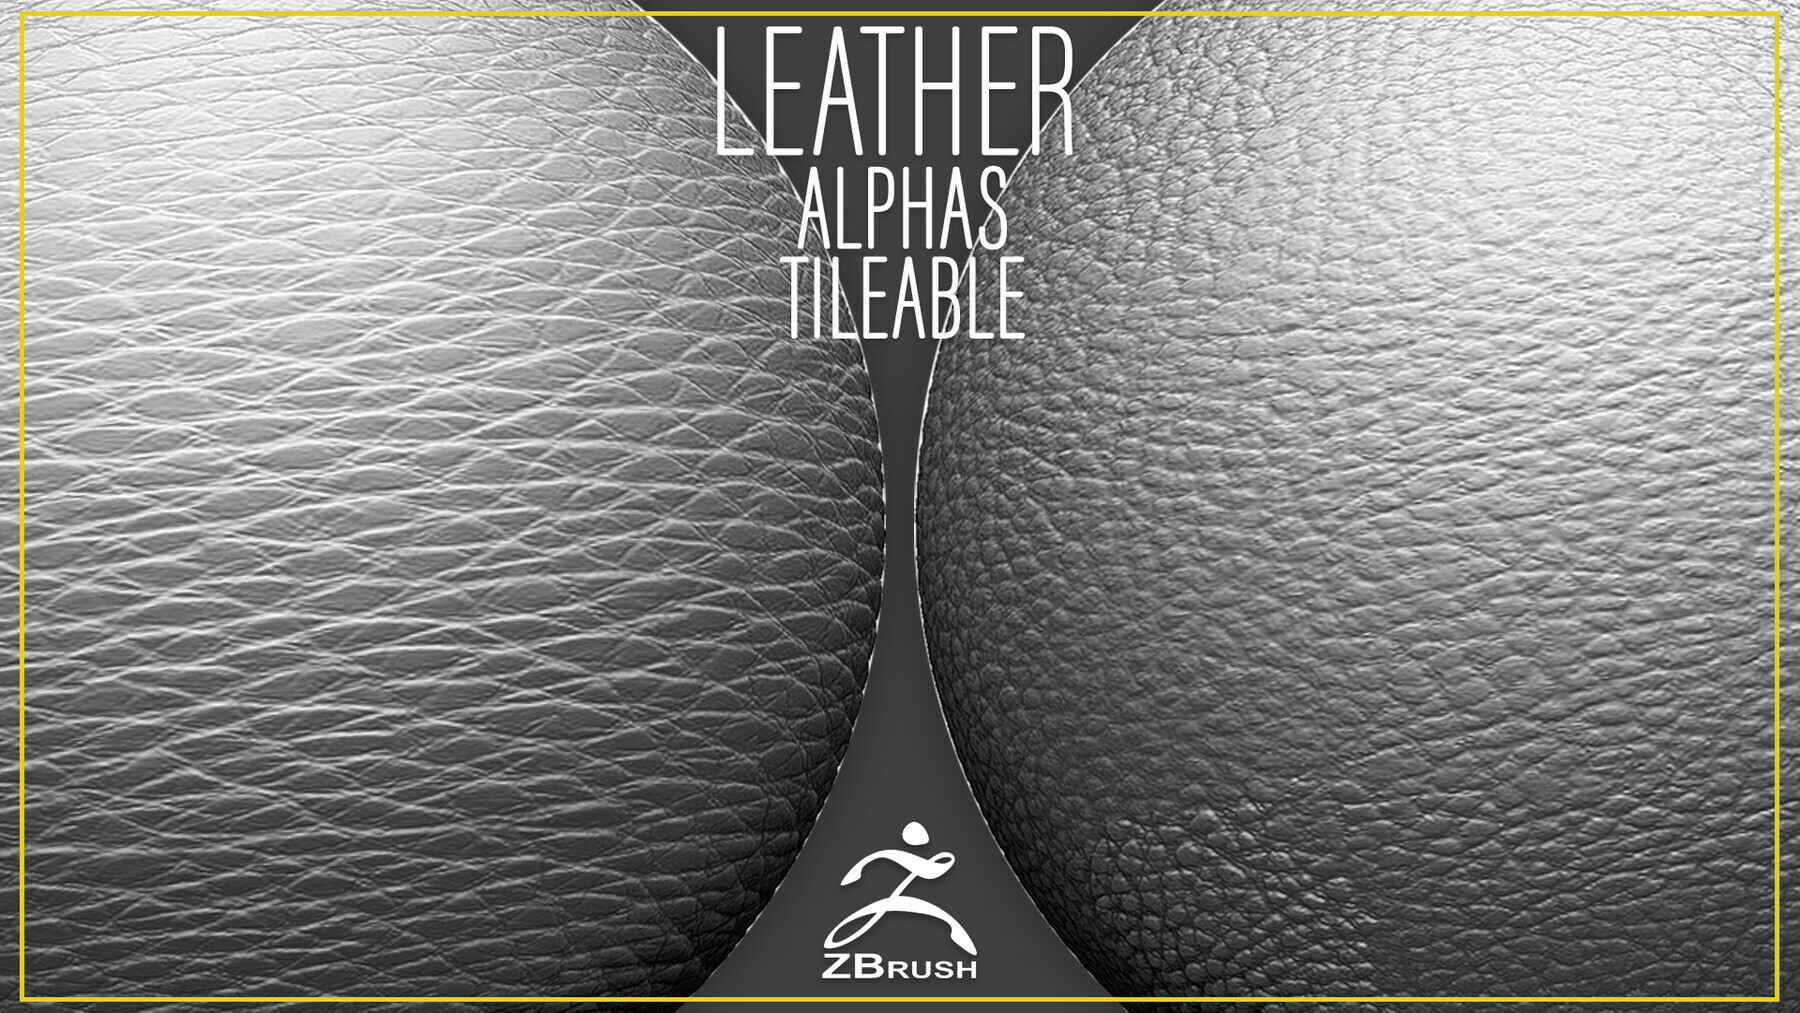 zbrush alphas leather